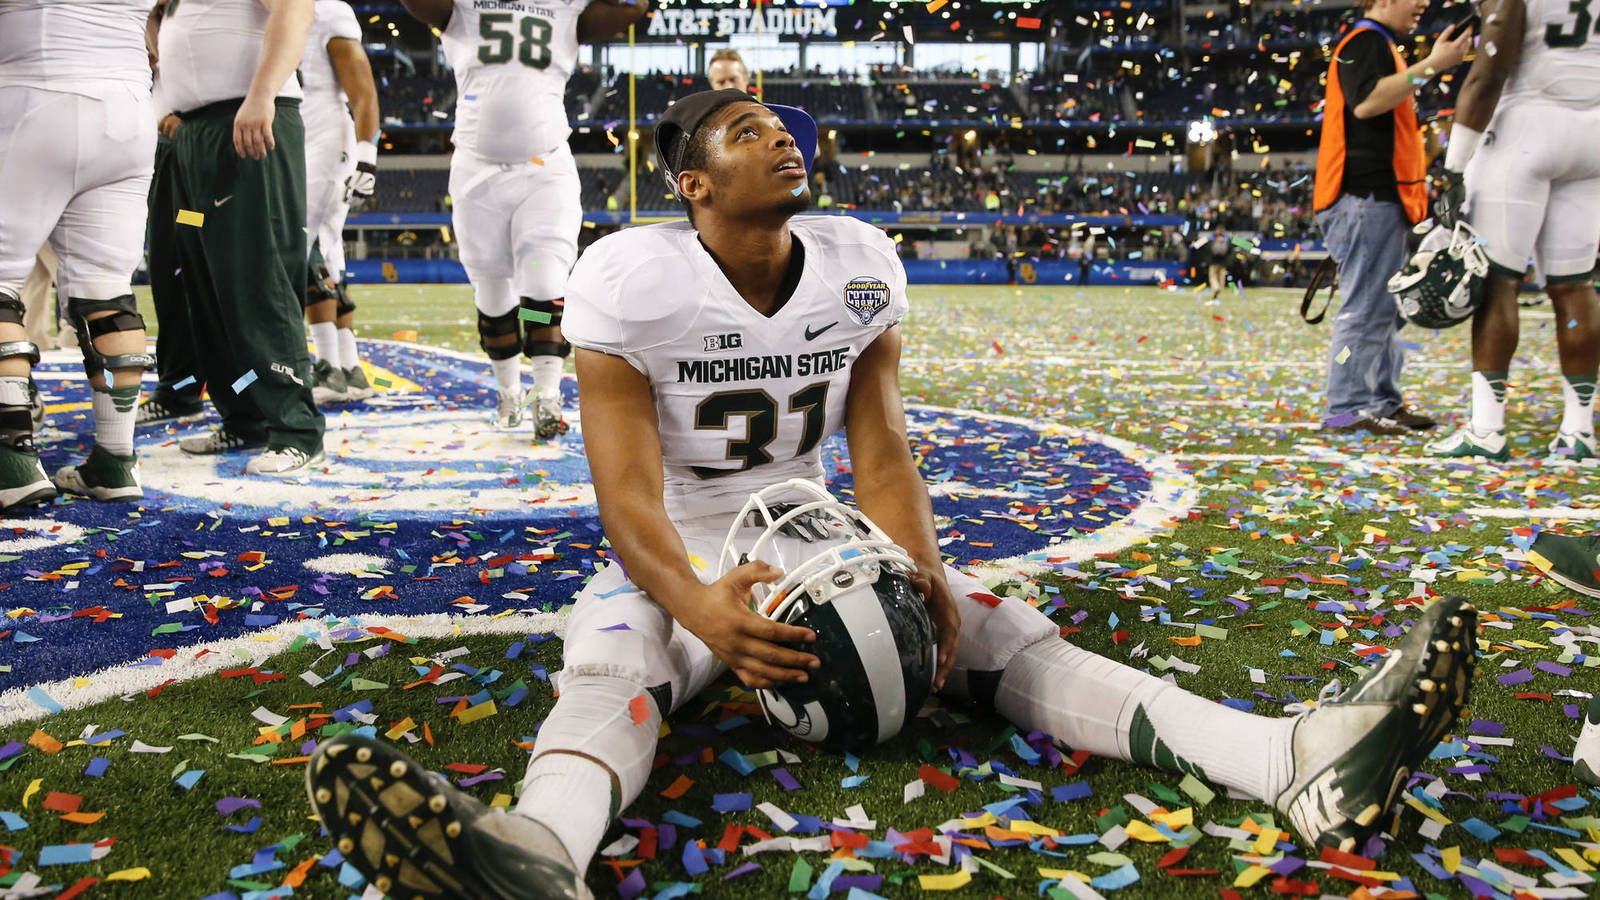 Best games and moments in Cotton Bowl history